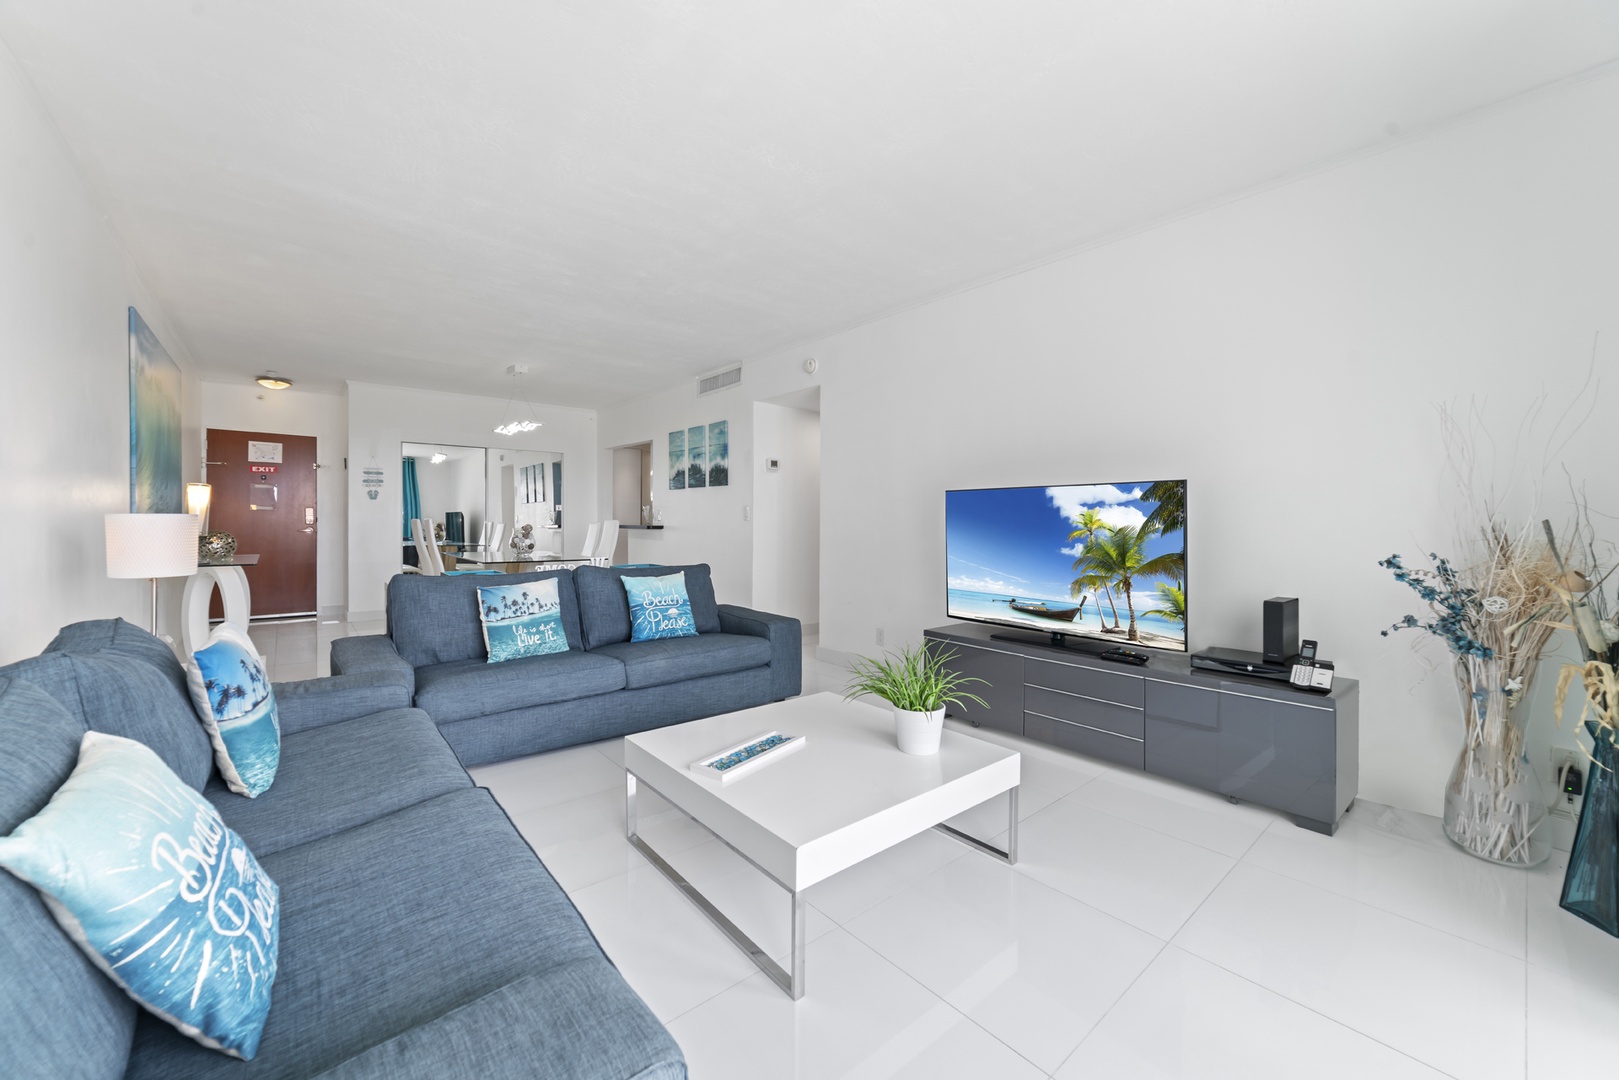 Bright living space with ample seating and TV